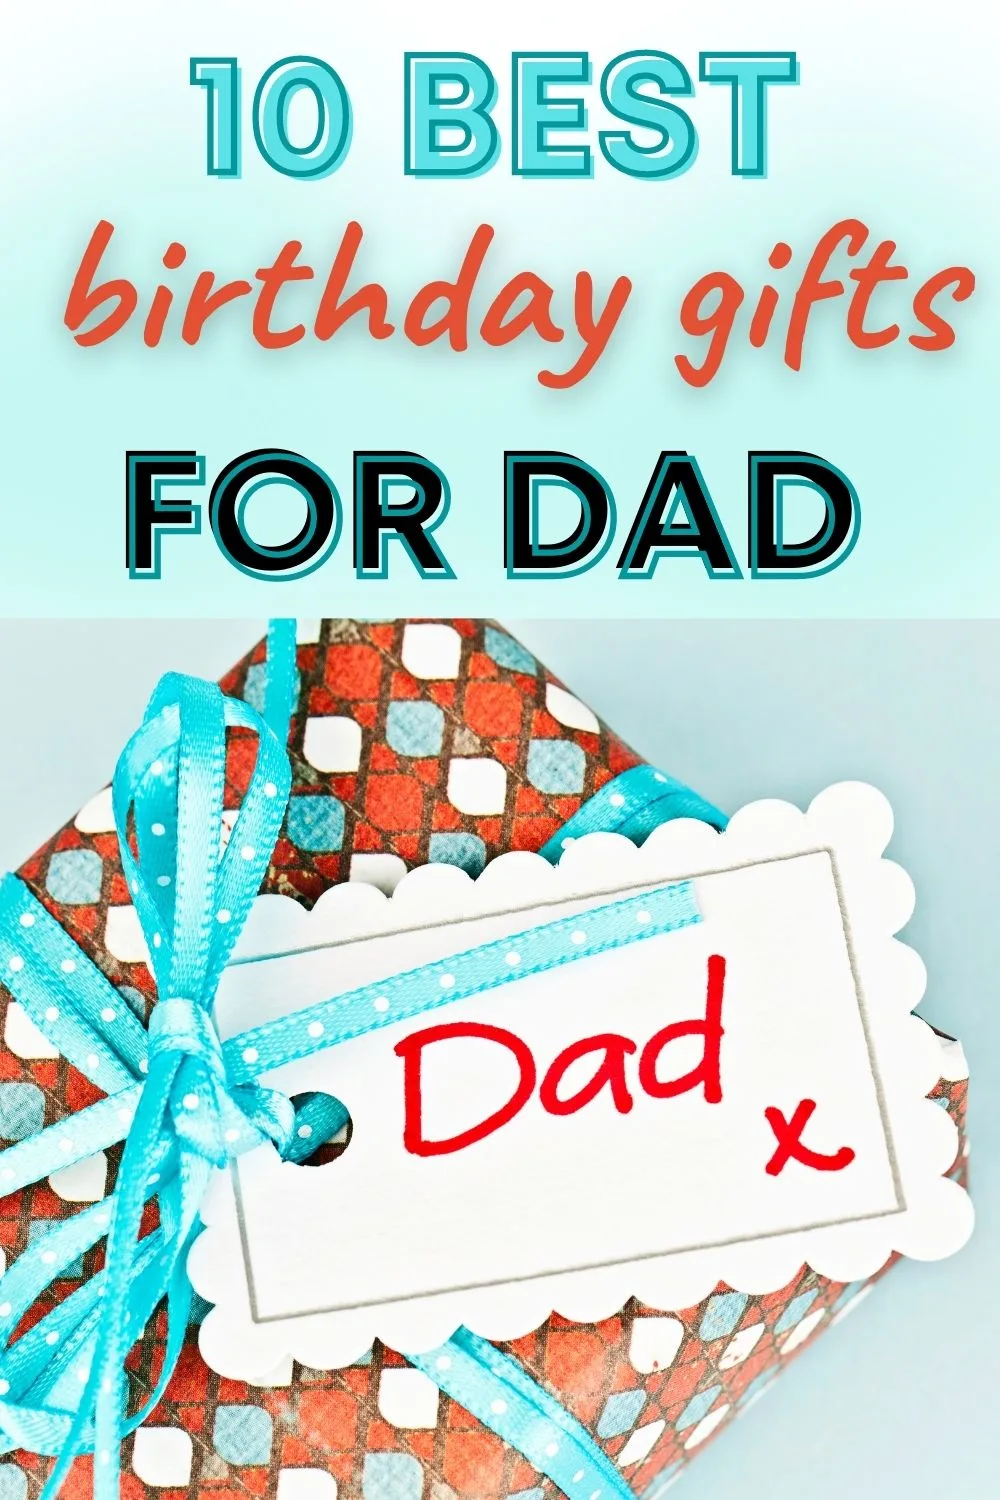 10 best birthday gifts for dad